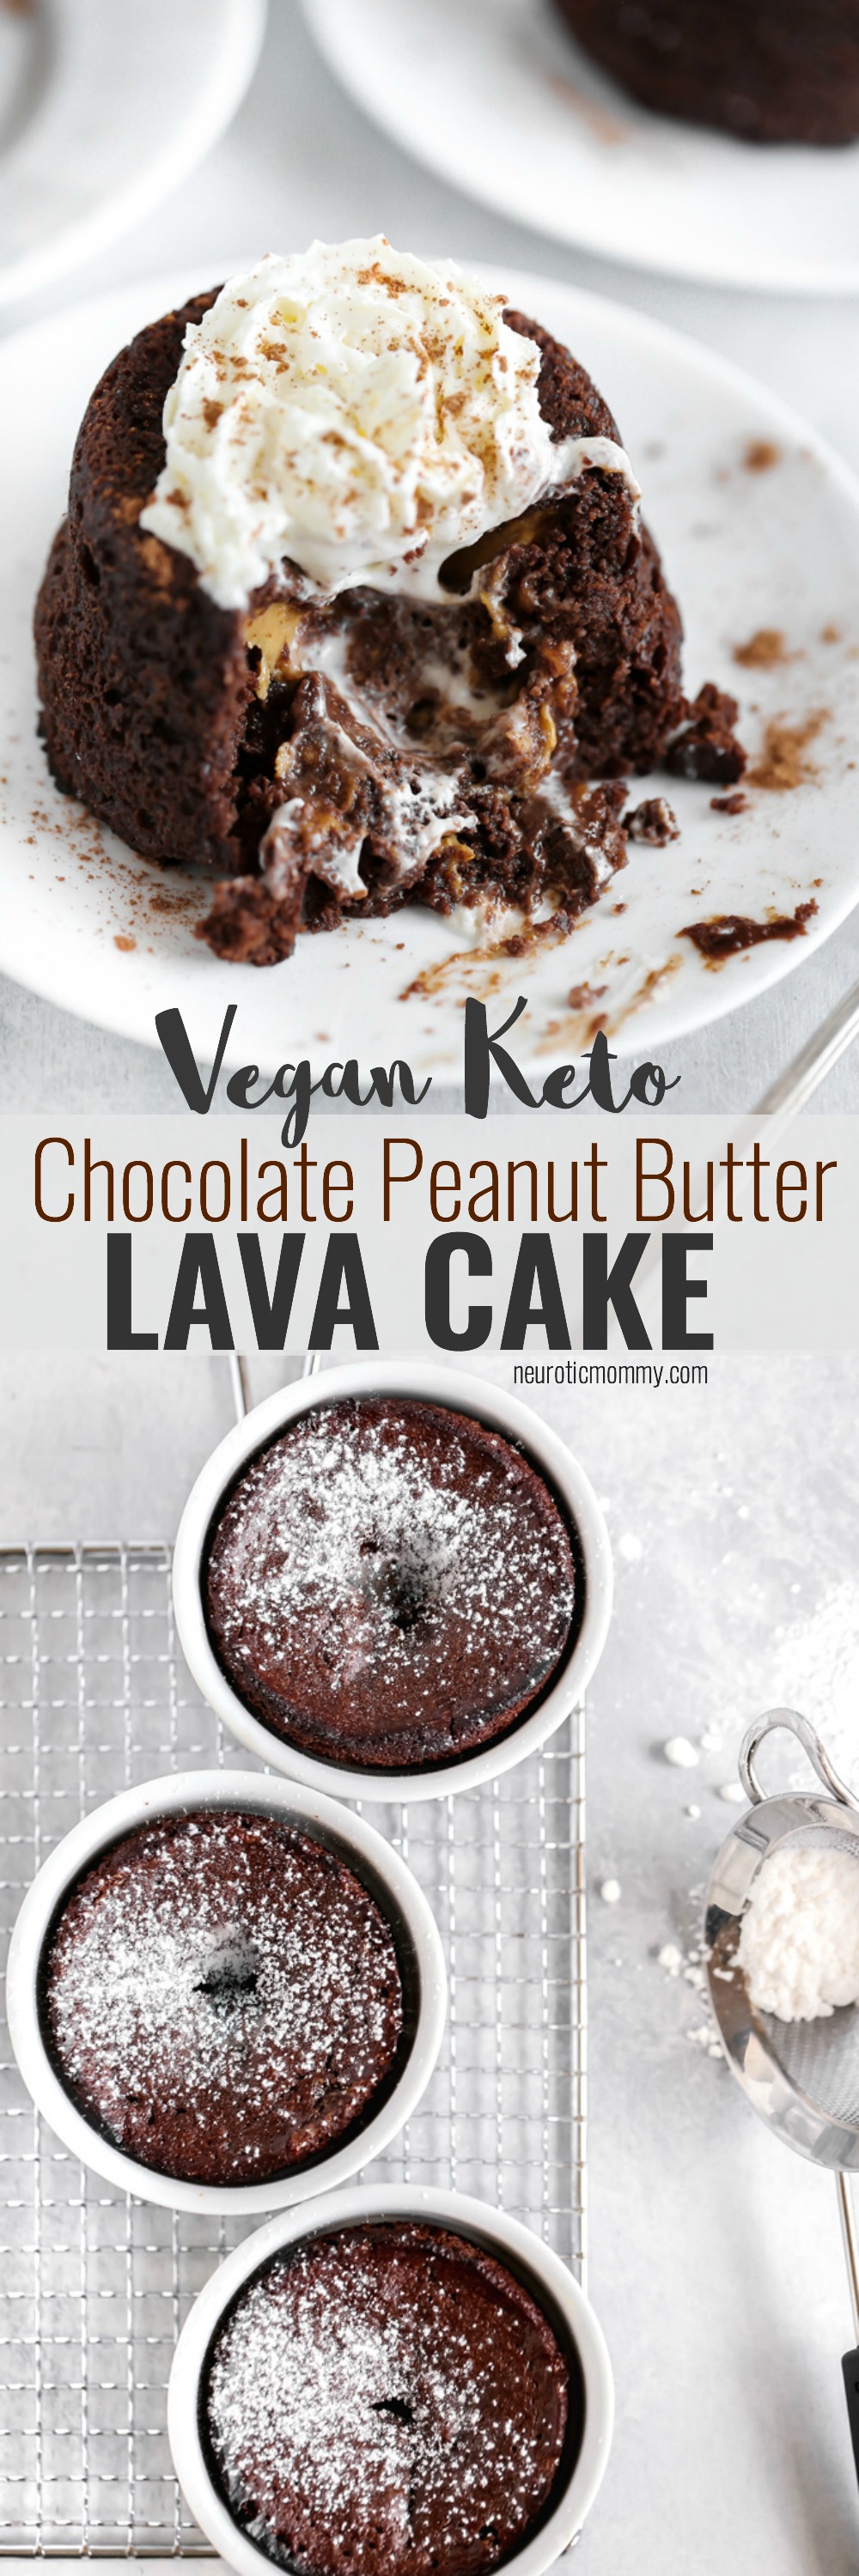 Vegan Keto Chocolate Peanut Butter Lava Cake - This is what real love looks like with an ooey, gooey peanut buttery center, this low carb chocolate decadence is the perfect keto treat. NeuroticMommy.com #veganketo #keto